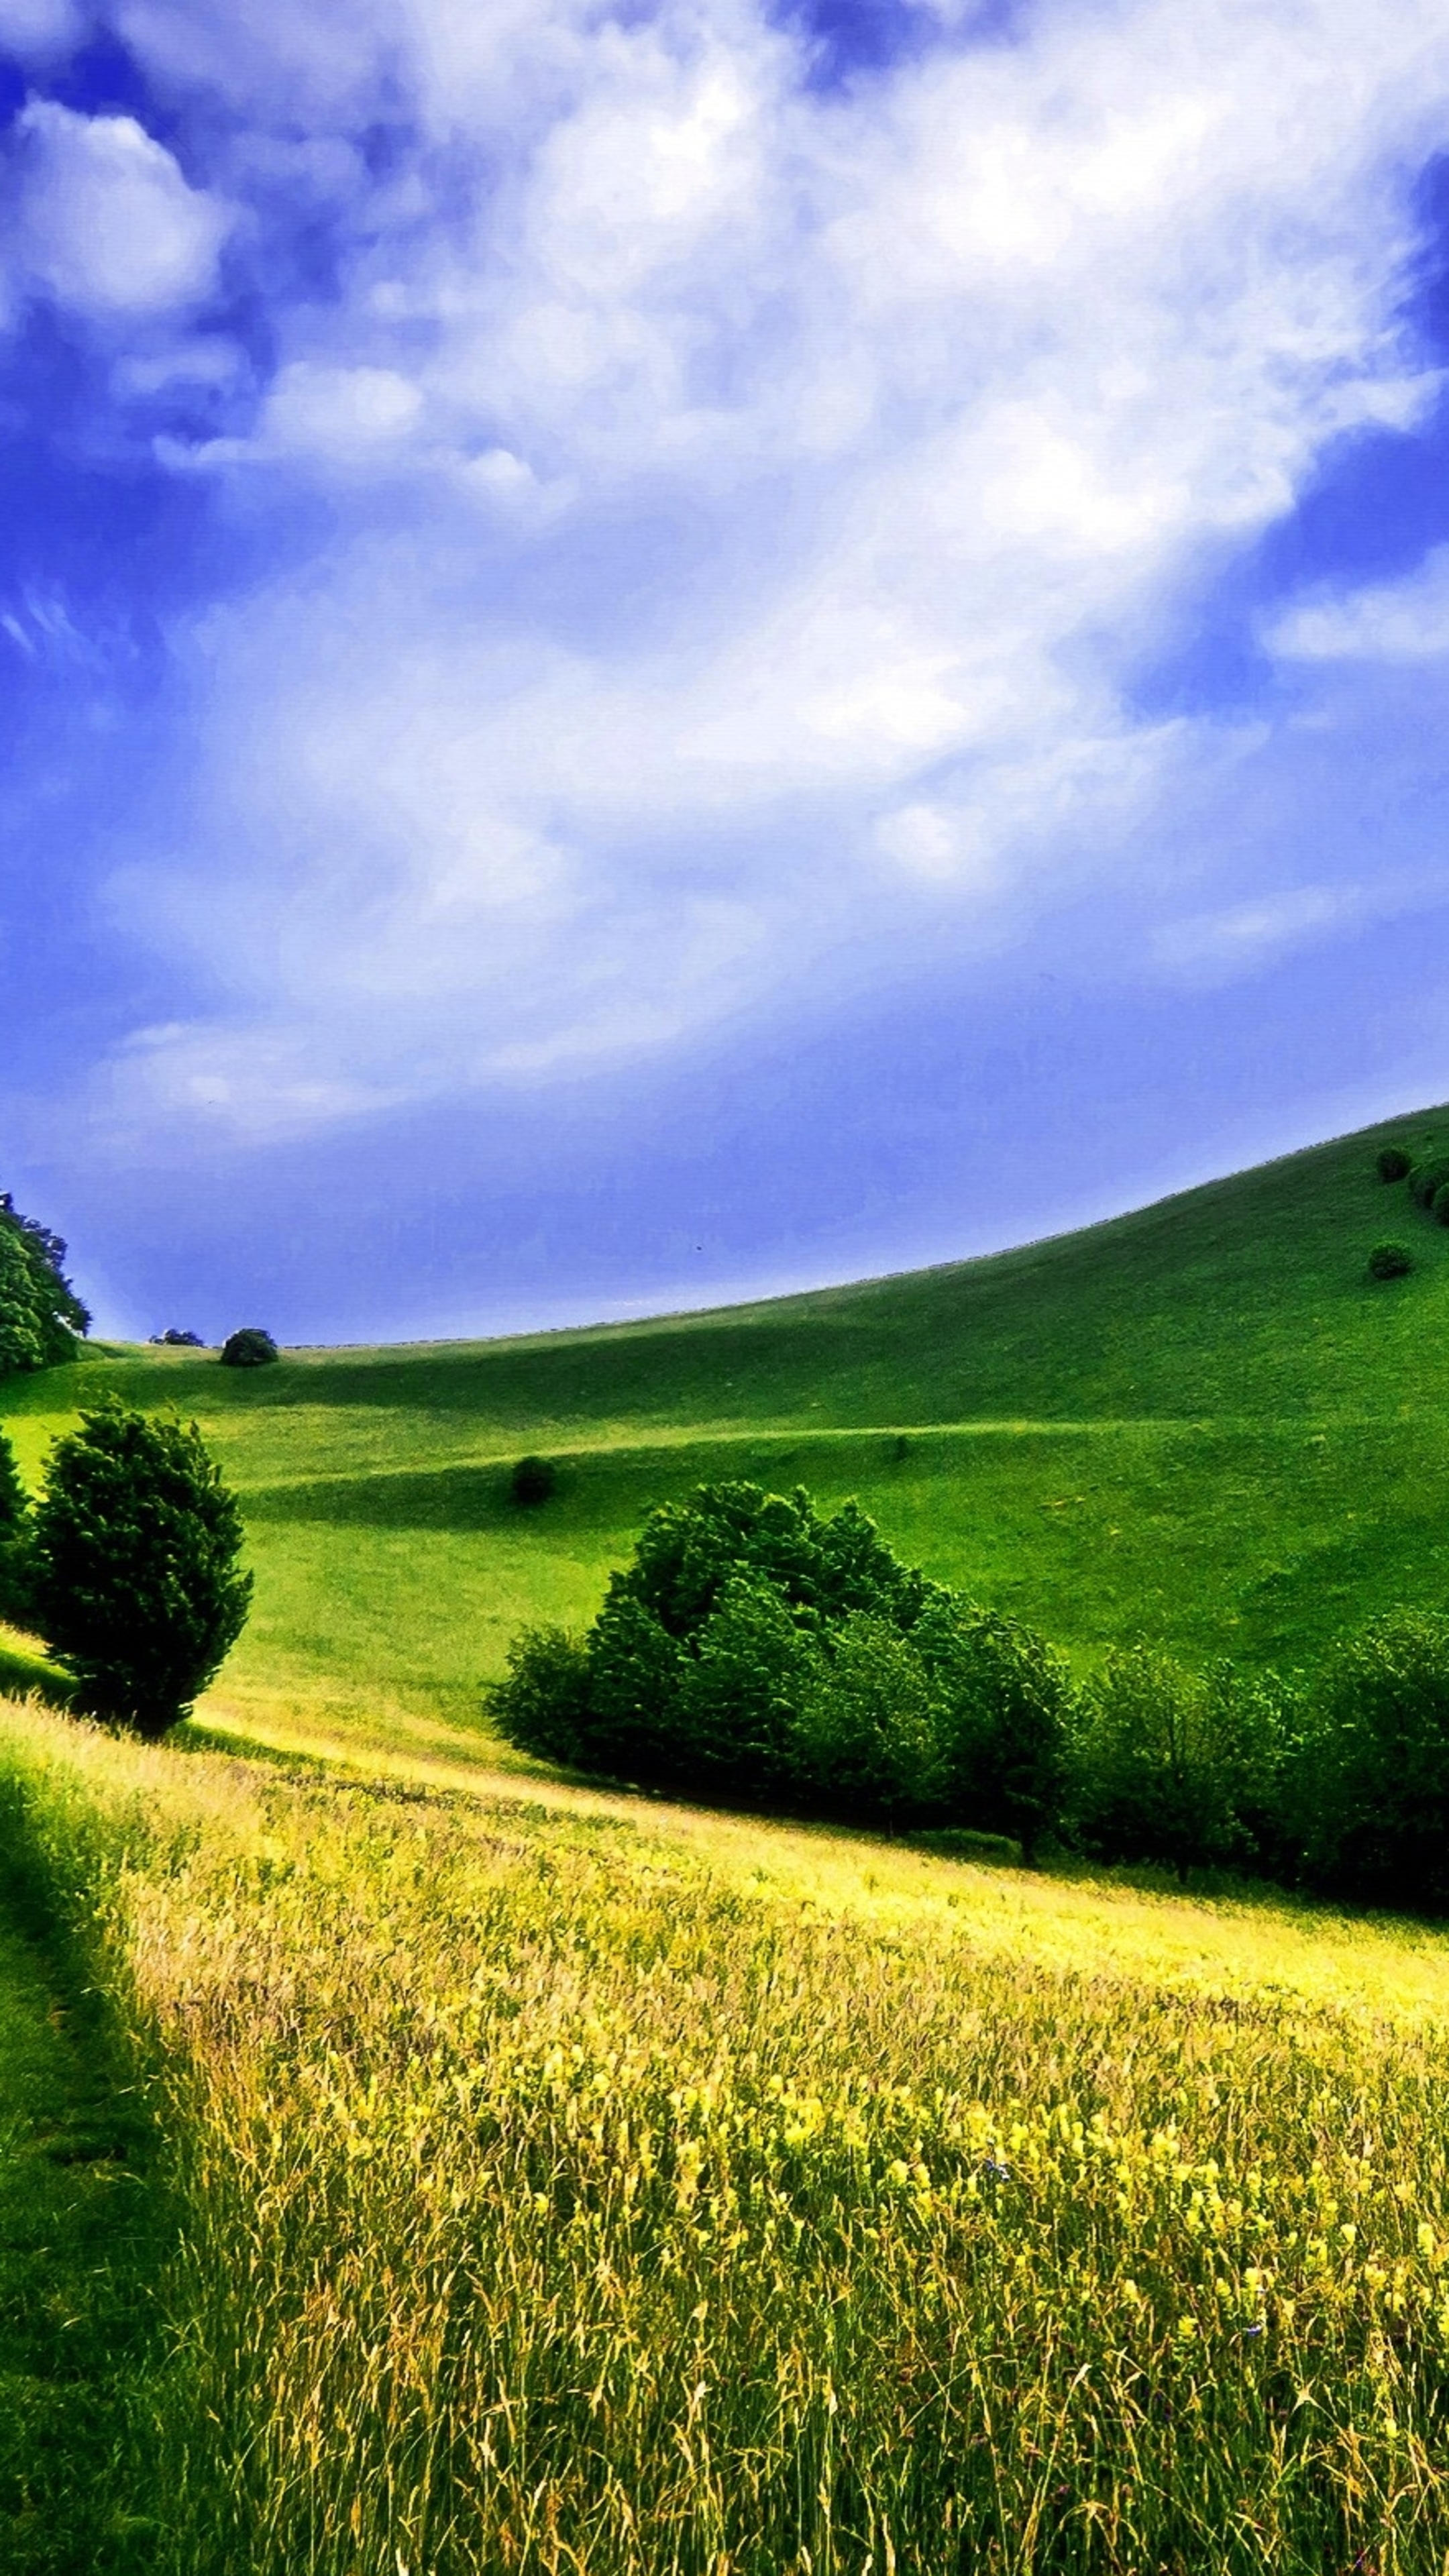 Farm: Land suitable for agricultural purposes. 2160x3840 4K Background.